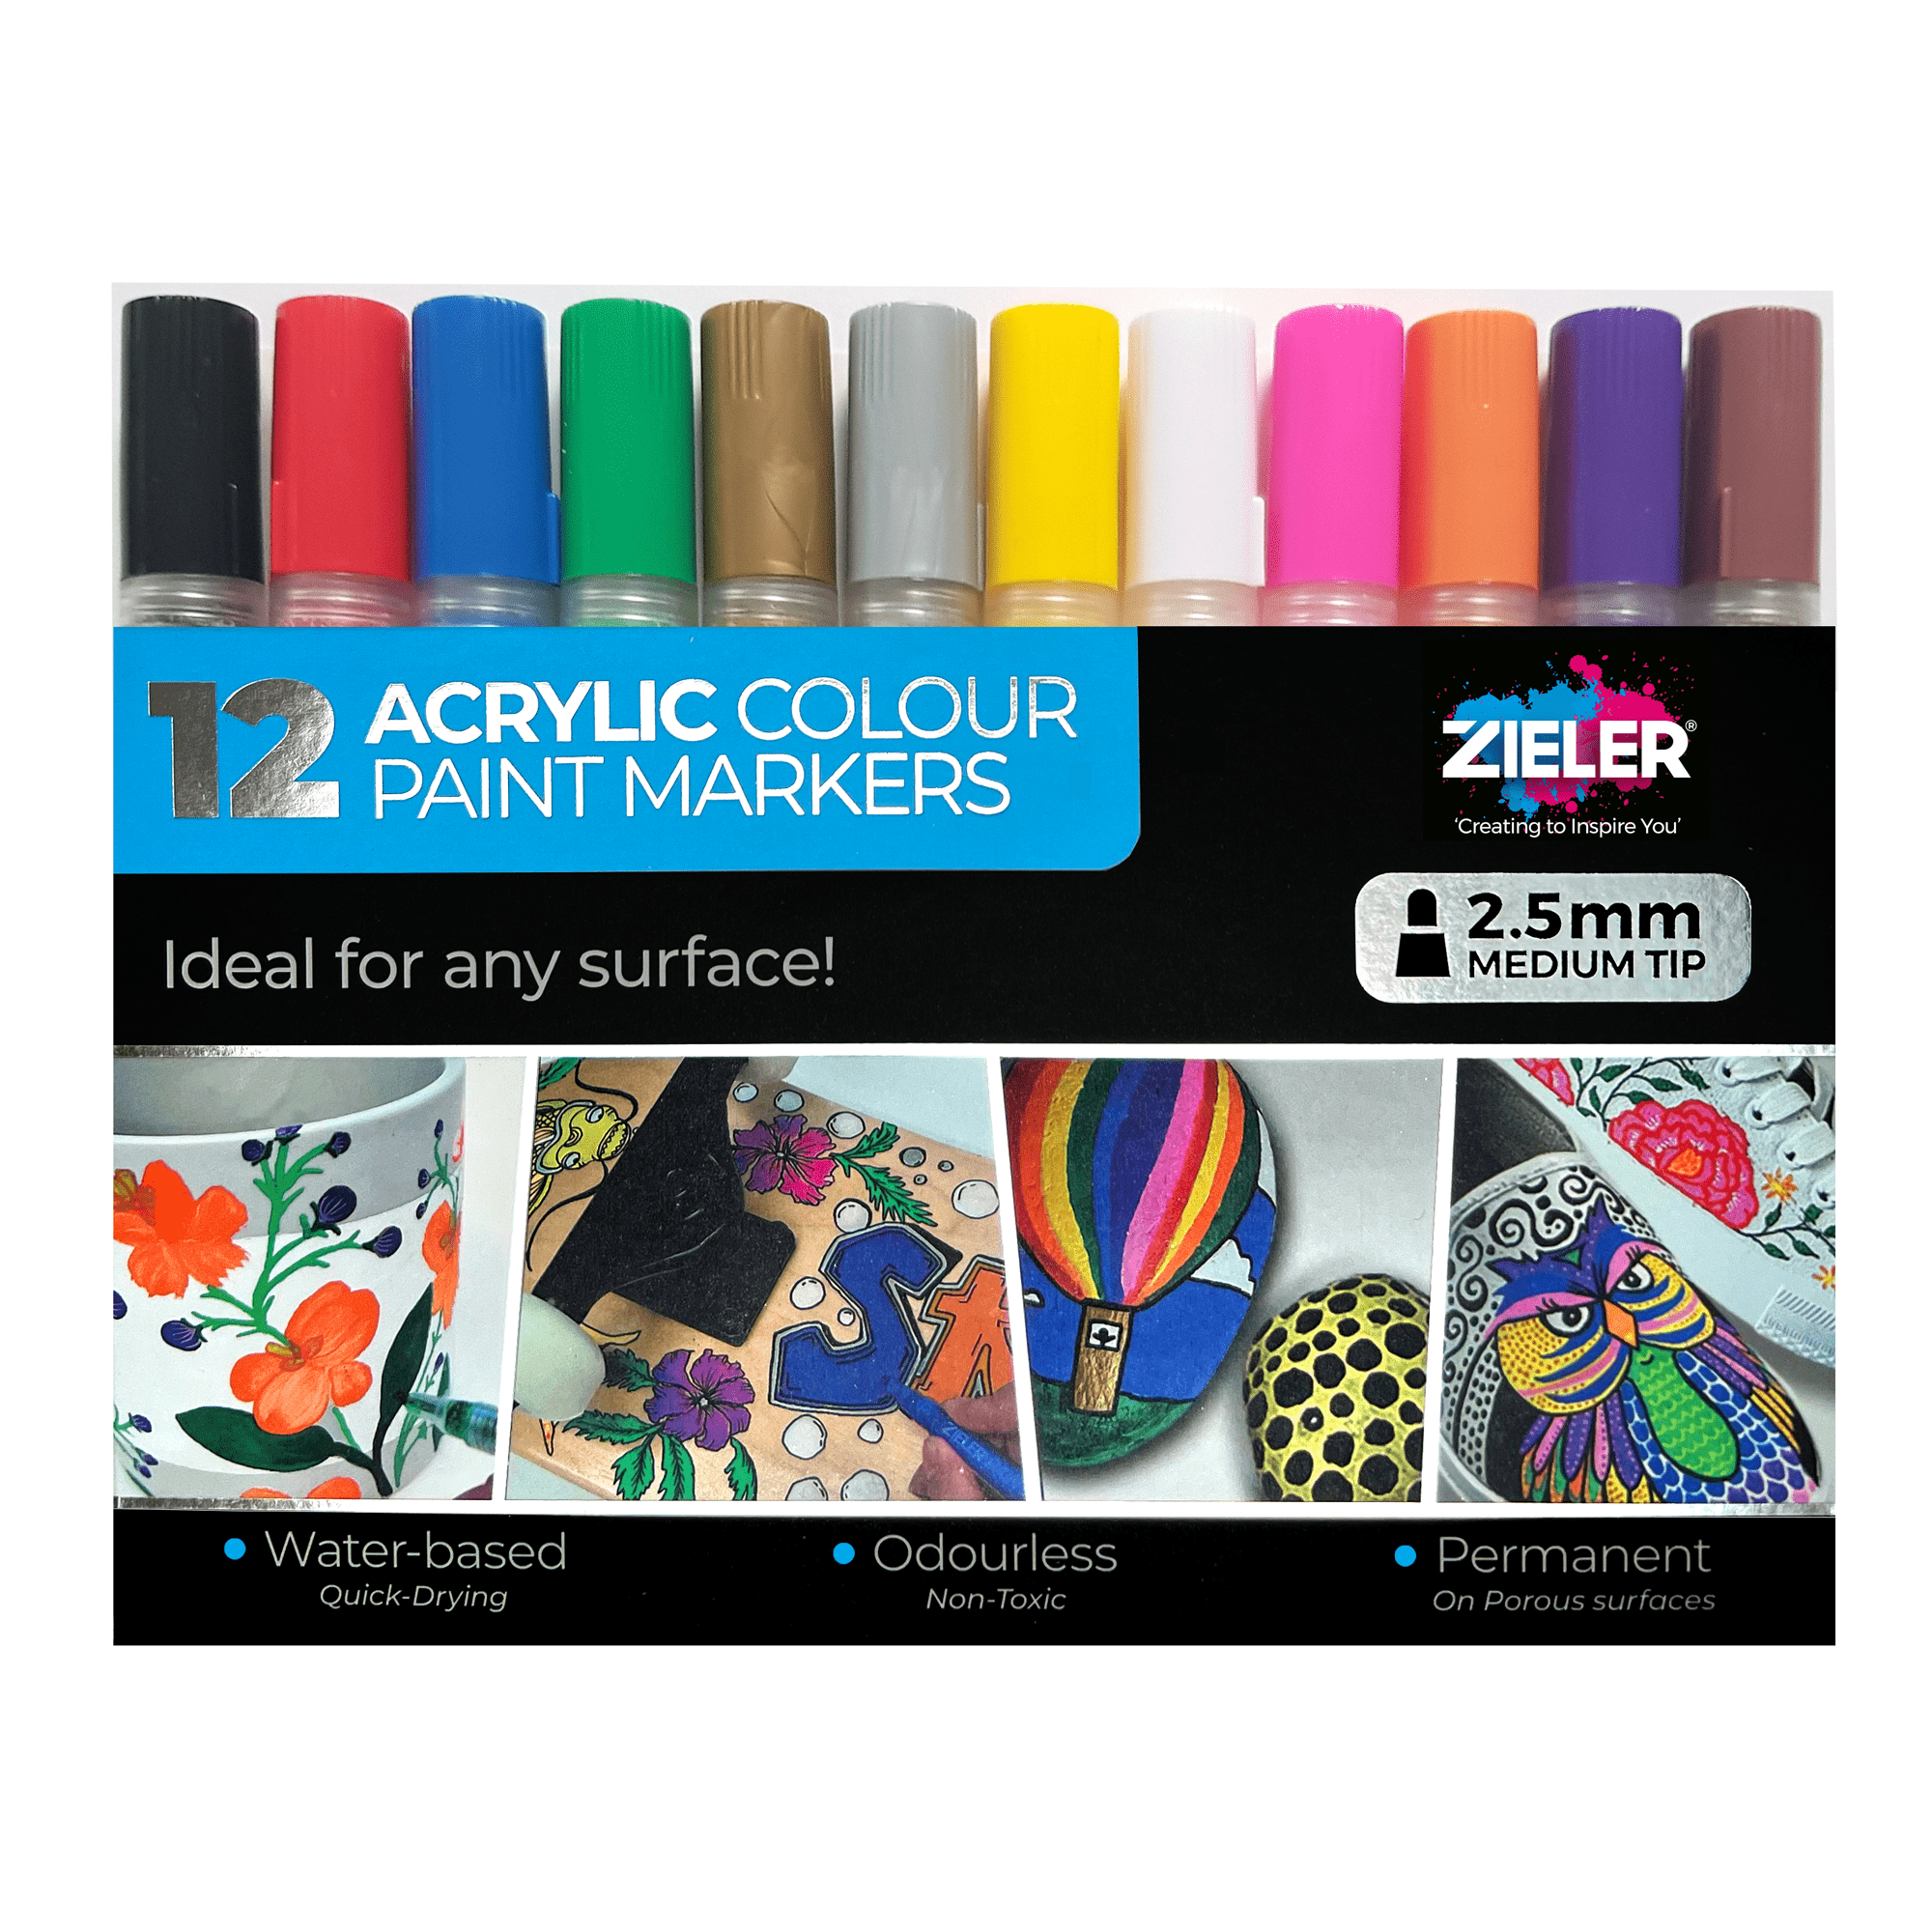 Acrylic Paint Markers pens Canvas Glass Fabric Ceramic Work on almost Anything Wood DIY Craft Mugs Medium Tip Marker for Art projects 12 Vibrant Colors Permanent Paint Pen Rocks Painting 